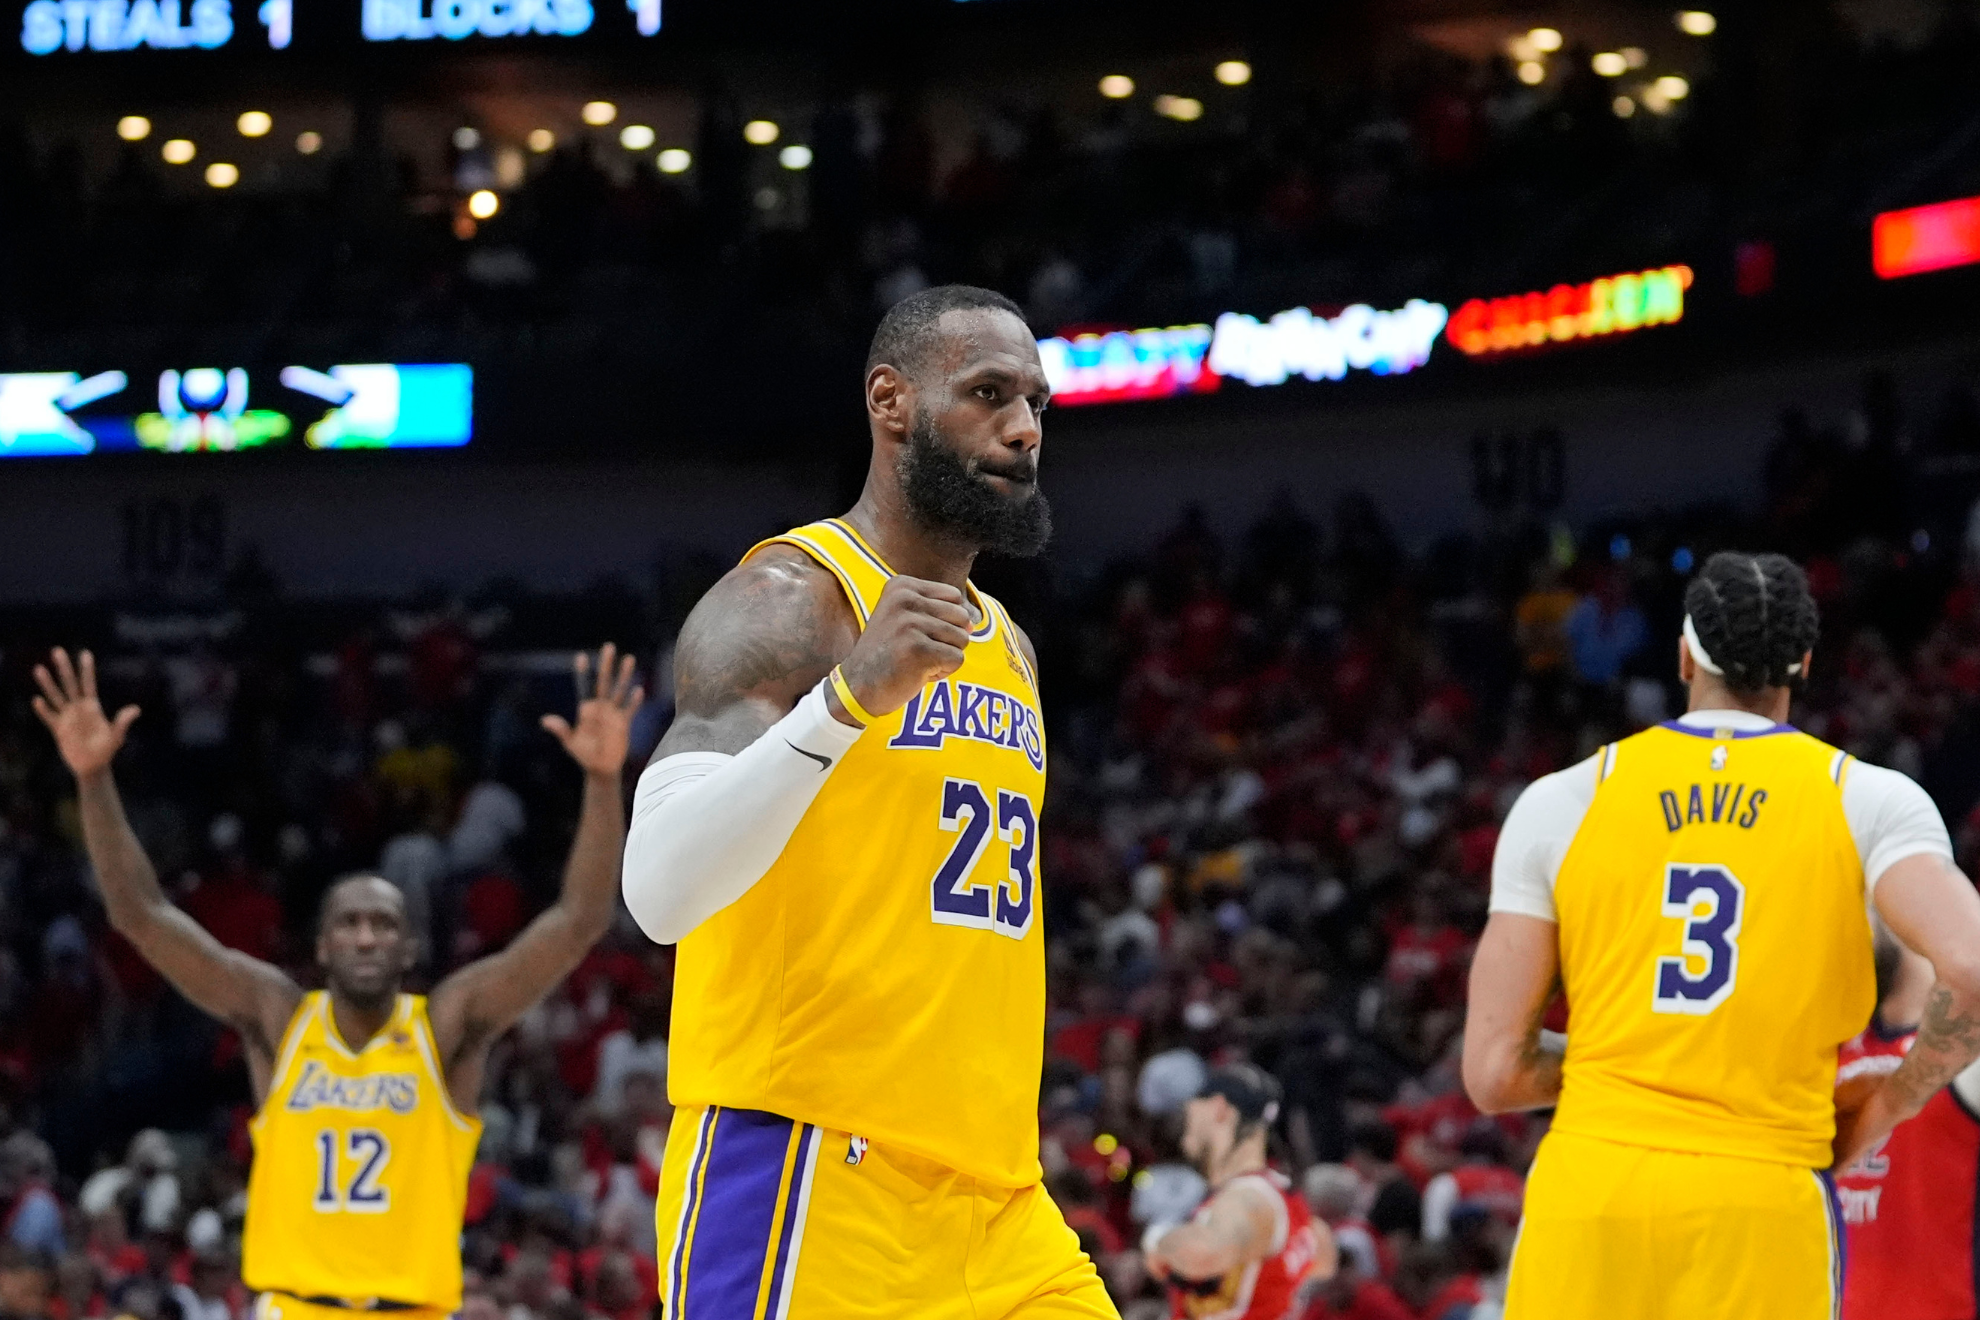 LeBron James worried Lakers fans after a dangerous play with Zion Williamson